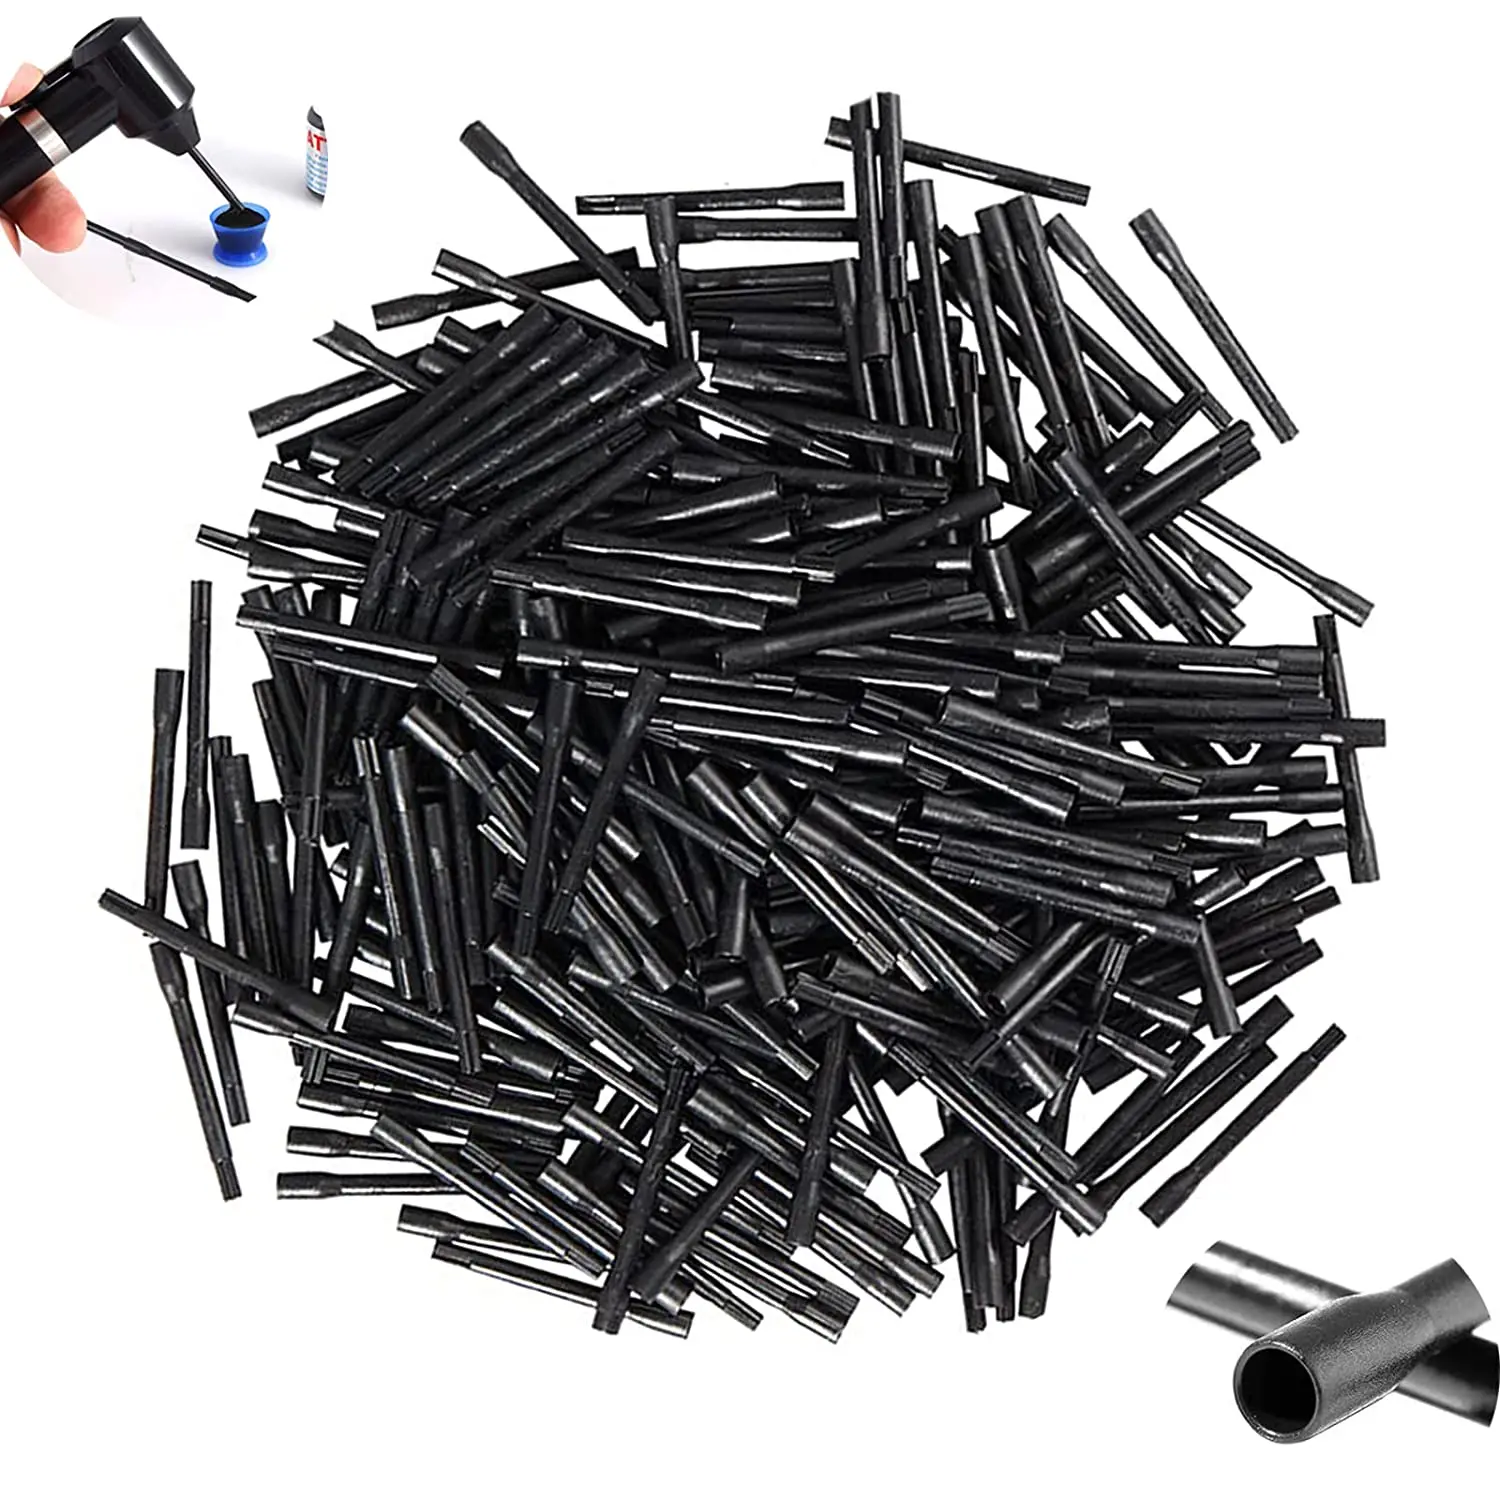 100Pcs Tattoo Ink Mixer Sticks Tattoo Pigment Mixing Sticks Plastic Stirring Rods Makeup Eyebrow Microblading Tool for Tattoo paint shaker gouache agitator paints mixer electric pigment stirring device tool pigments mixing hand held